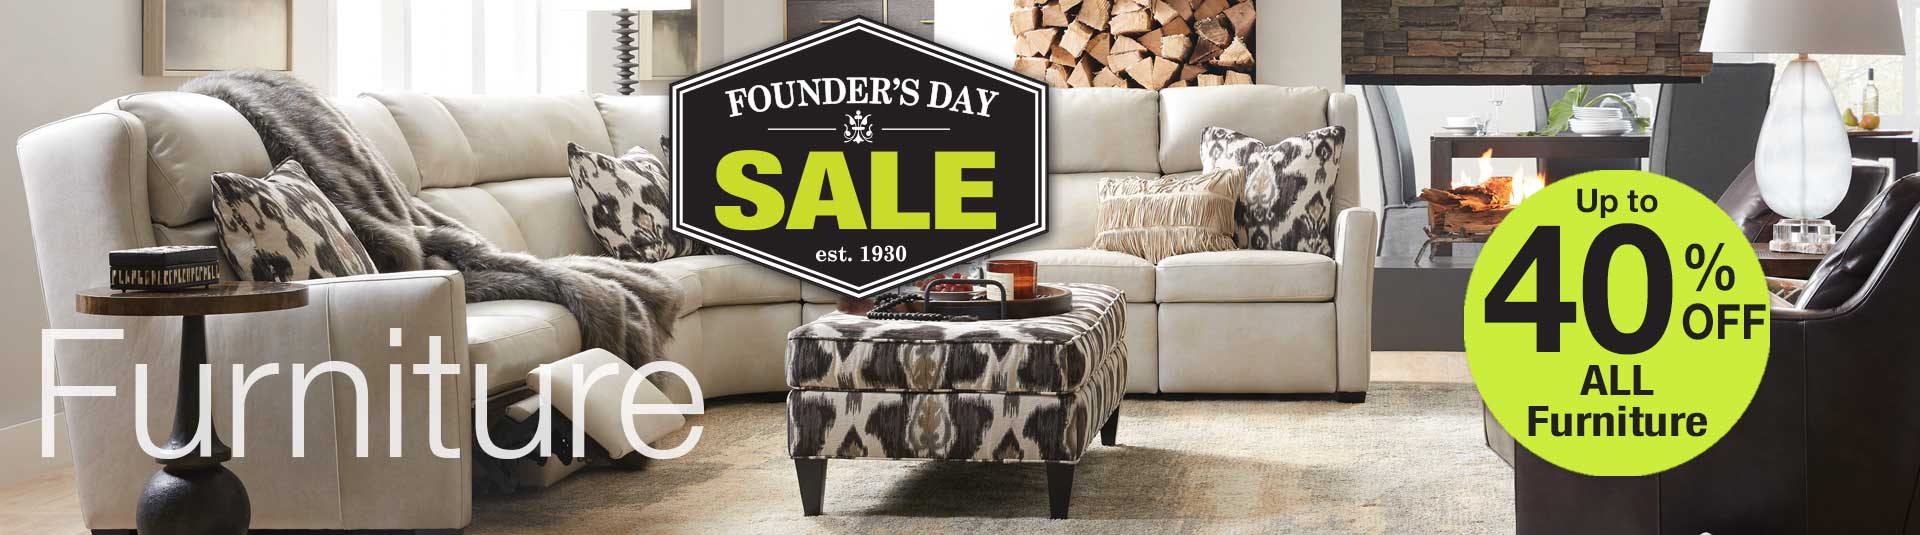 All Furniture up to 40% OFF at the Founder's Day Sale at Benson Stone Company!